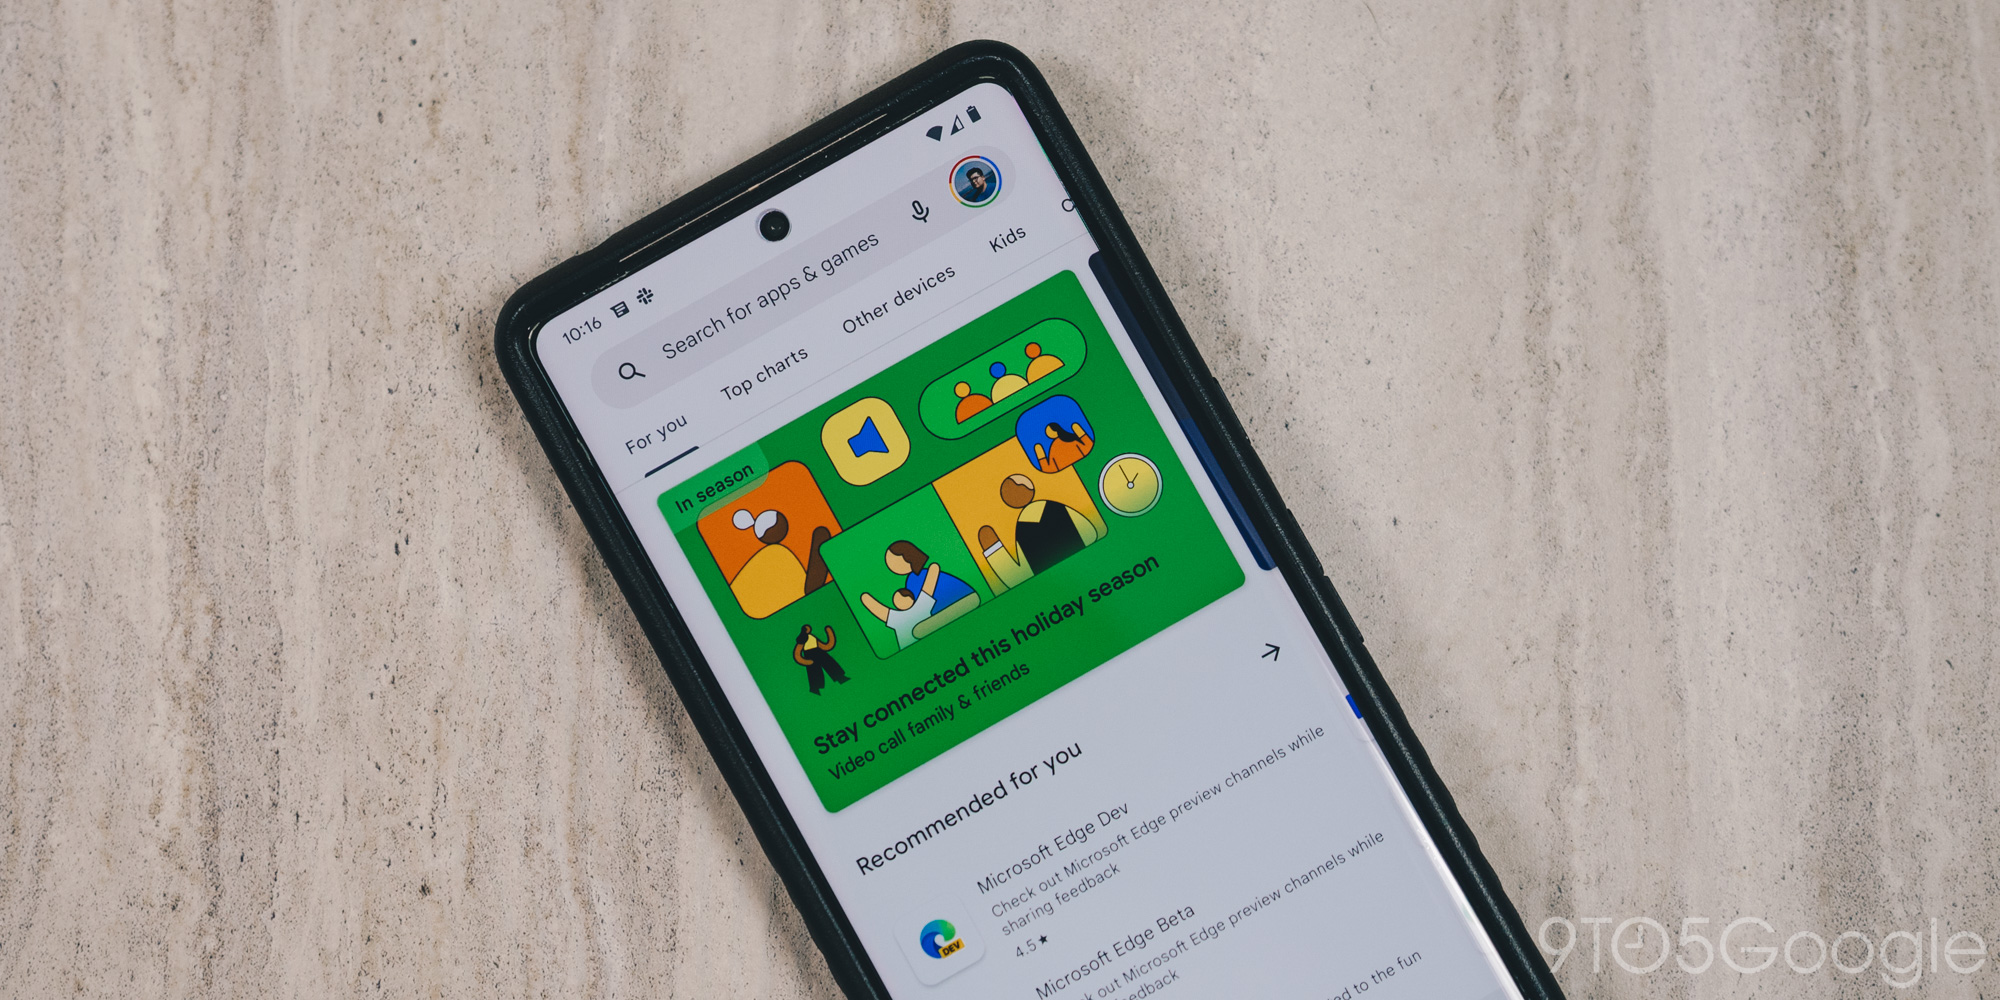 How to redeem a Google Play Store gift card